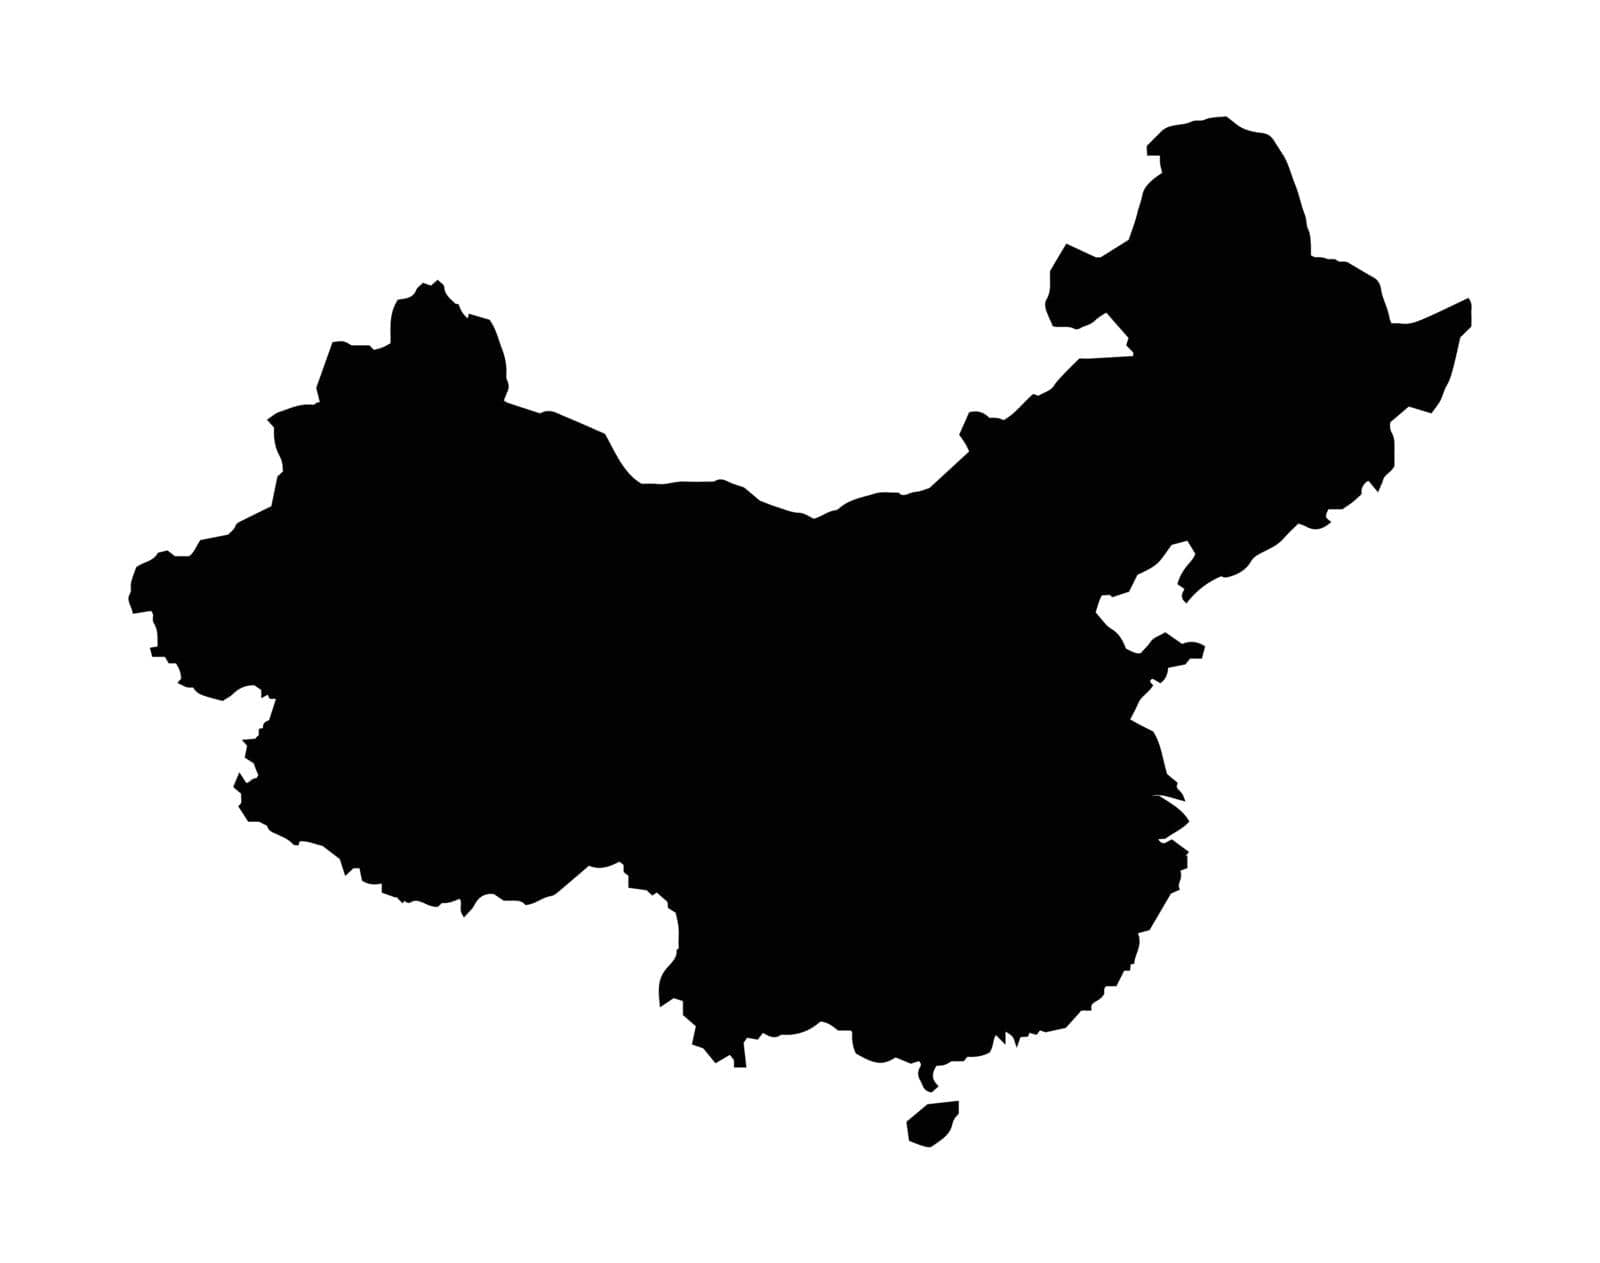 Outline map of China in black silhouette set over a white background